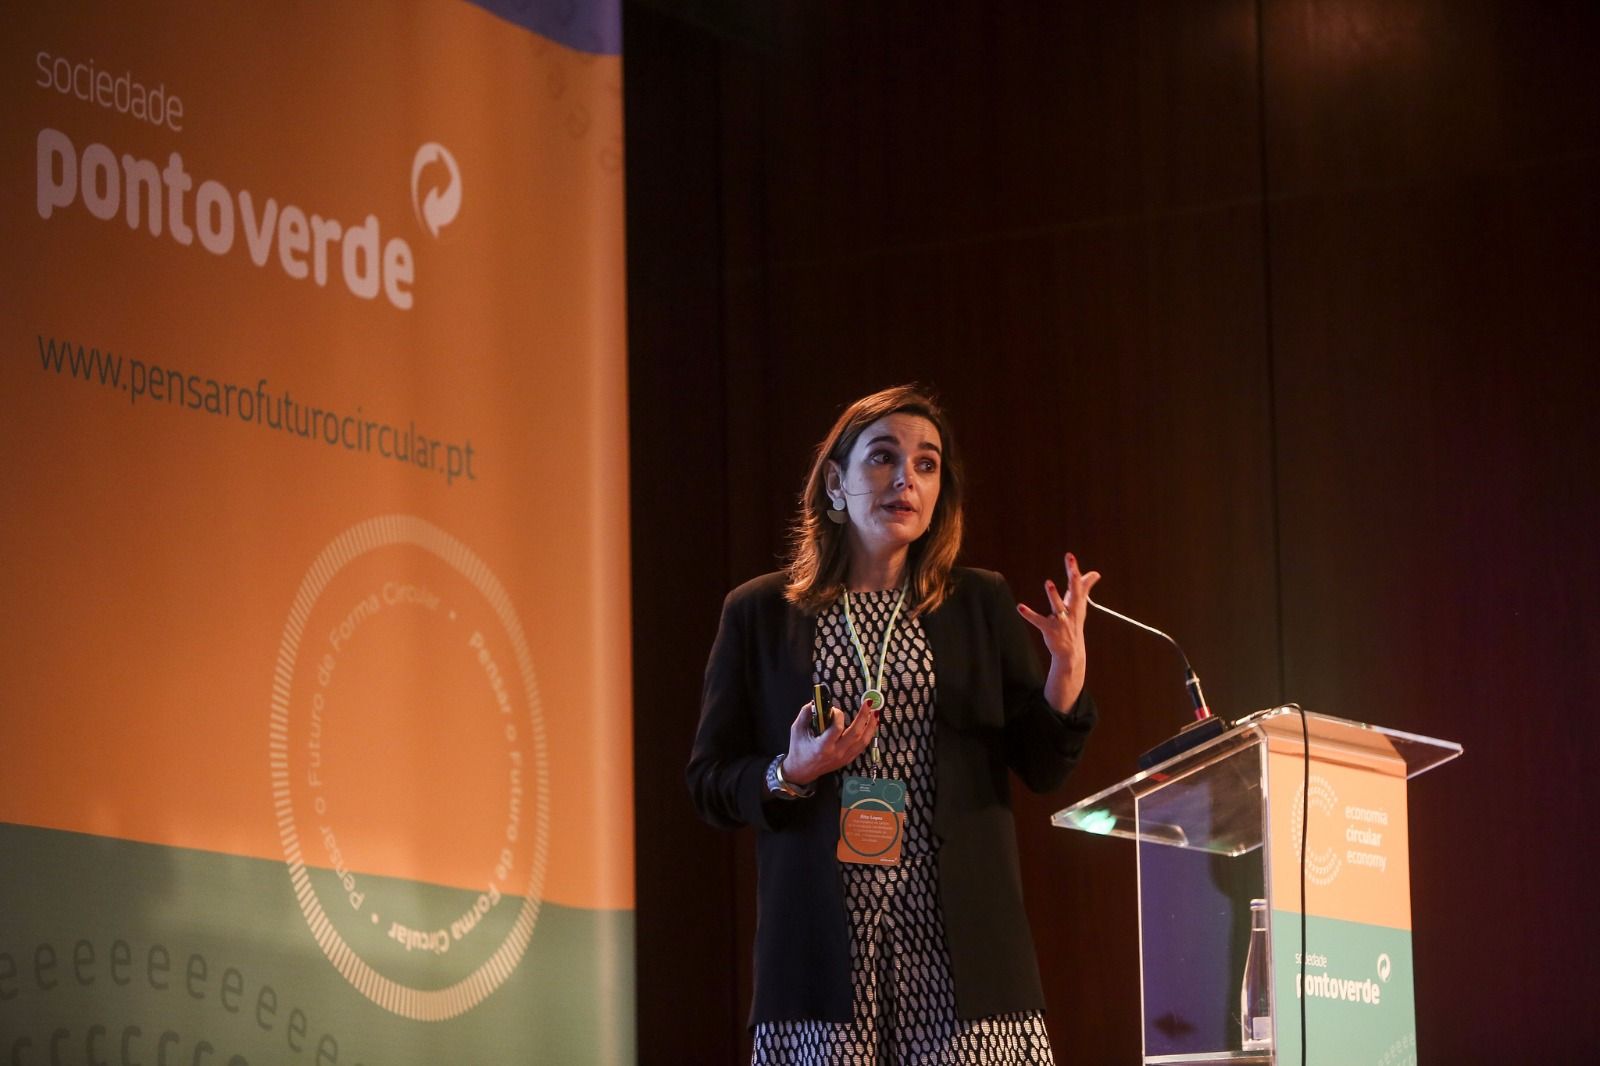 CENSE researcher presents study on the potential of the circular economy in Portugal